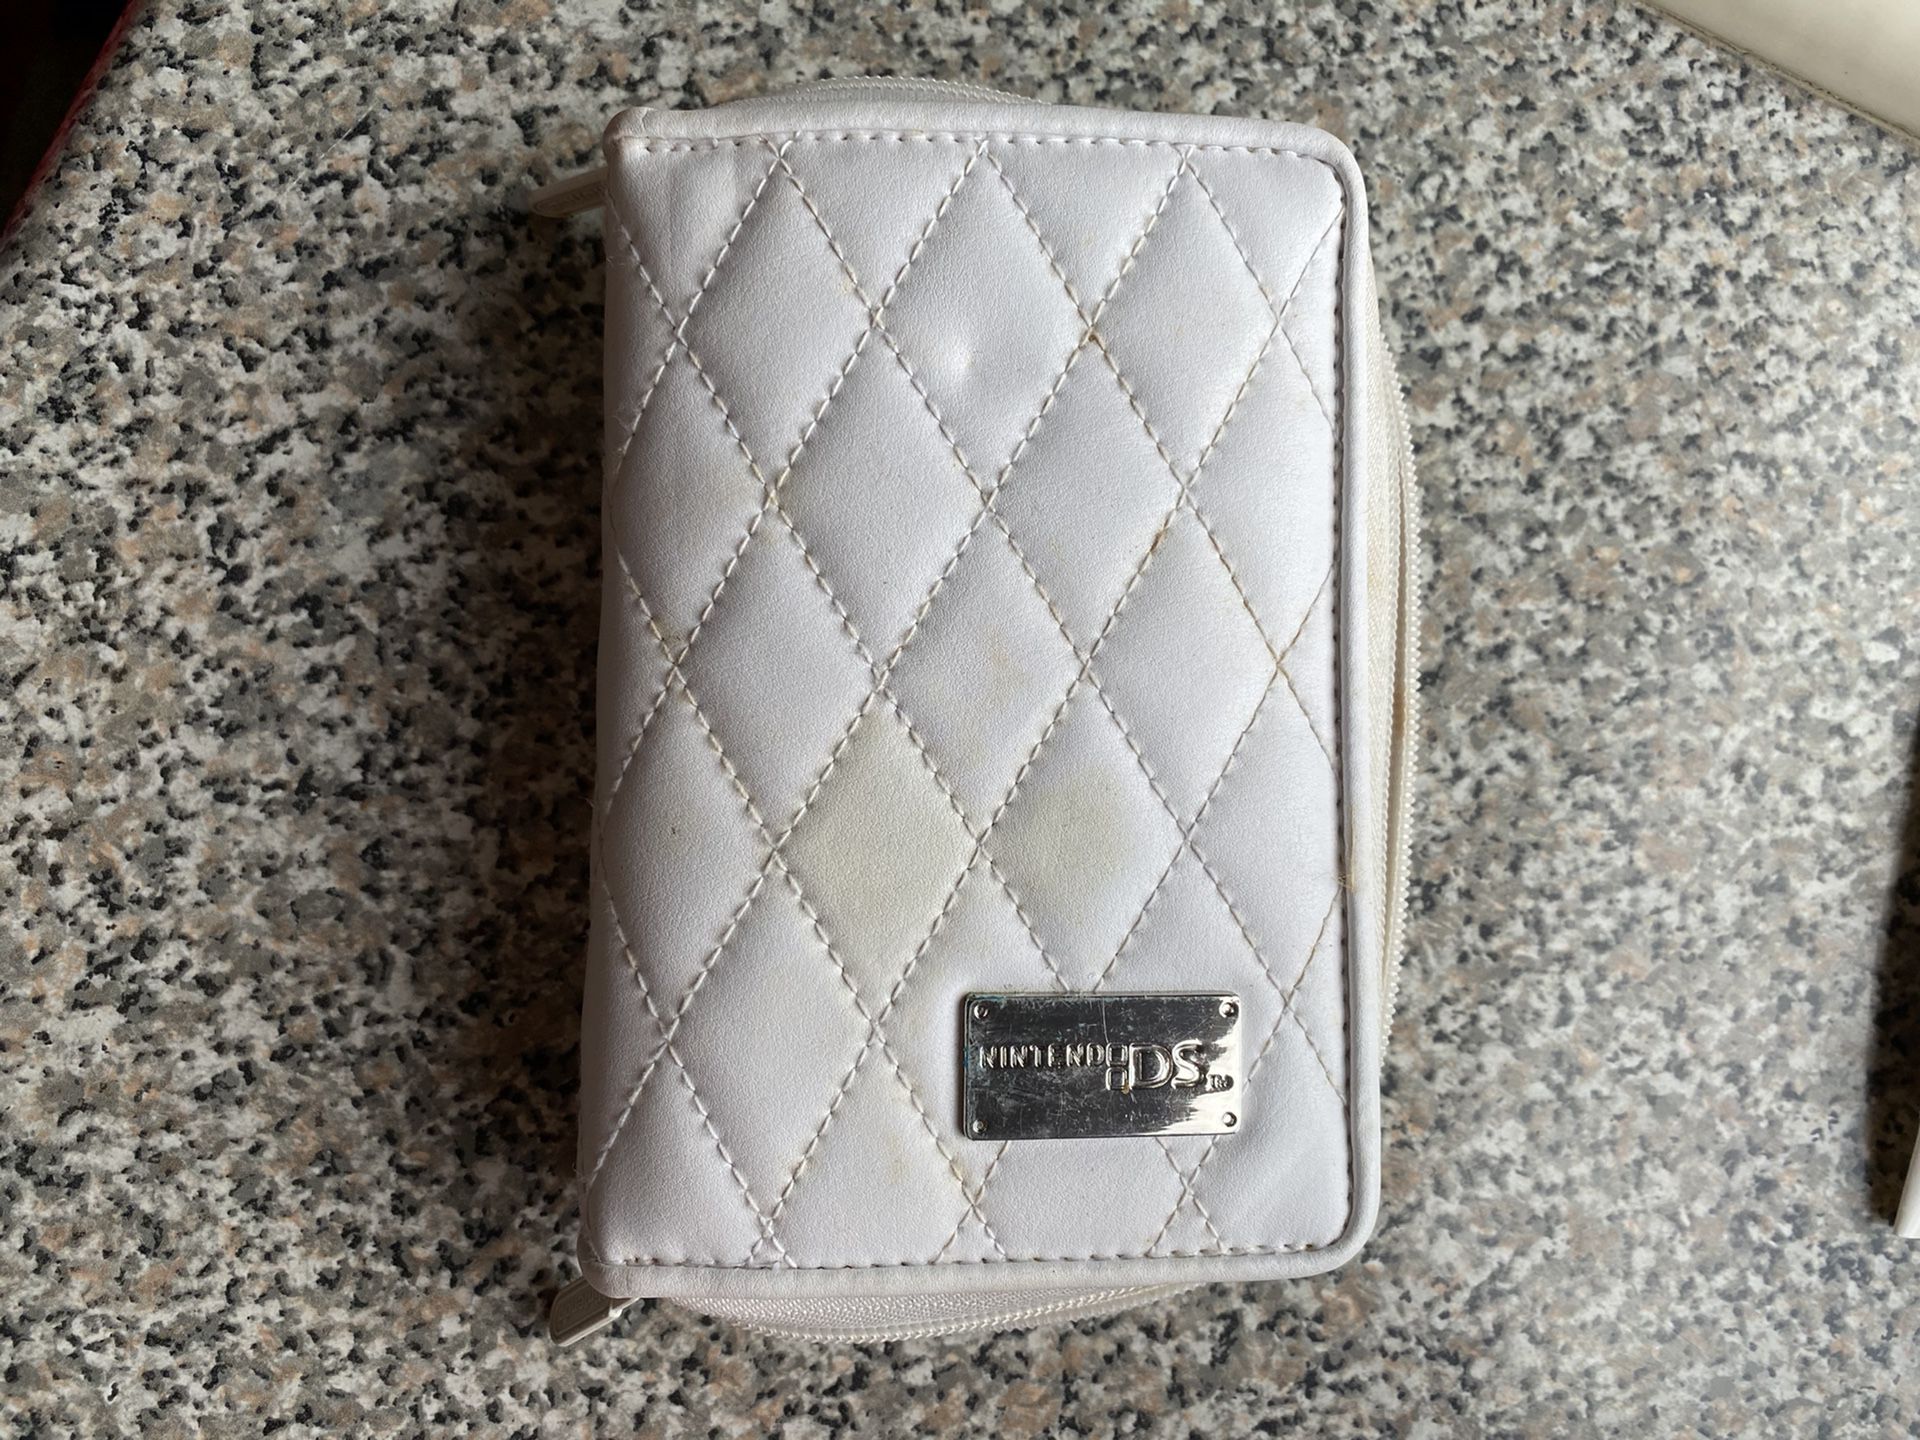 Nintendo DS white leather case